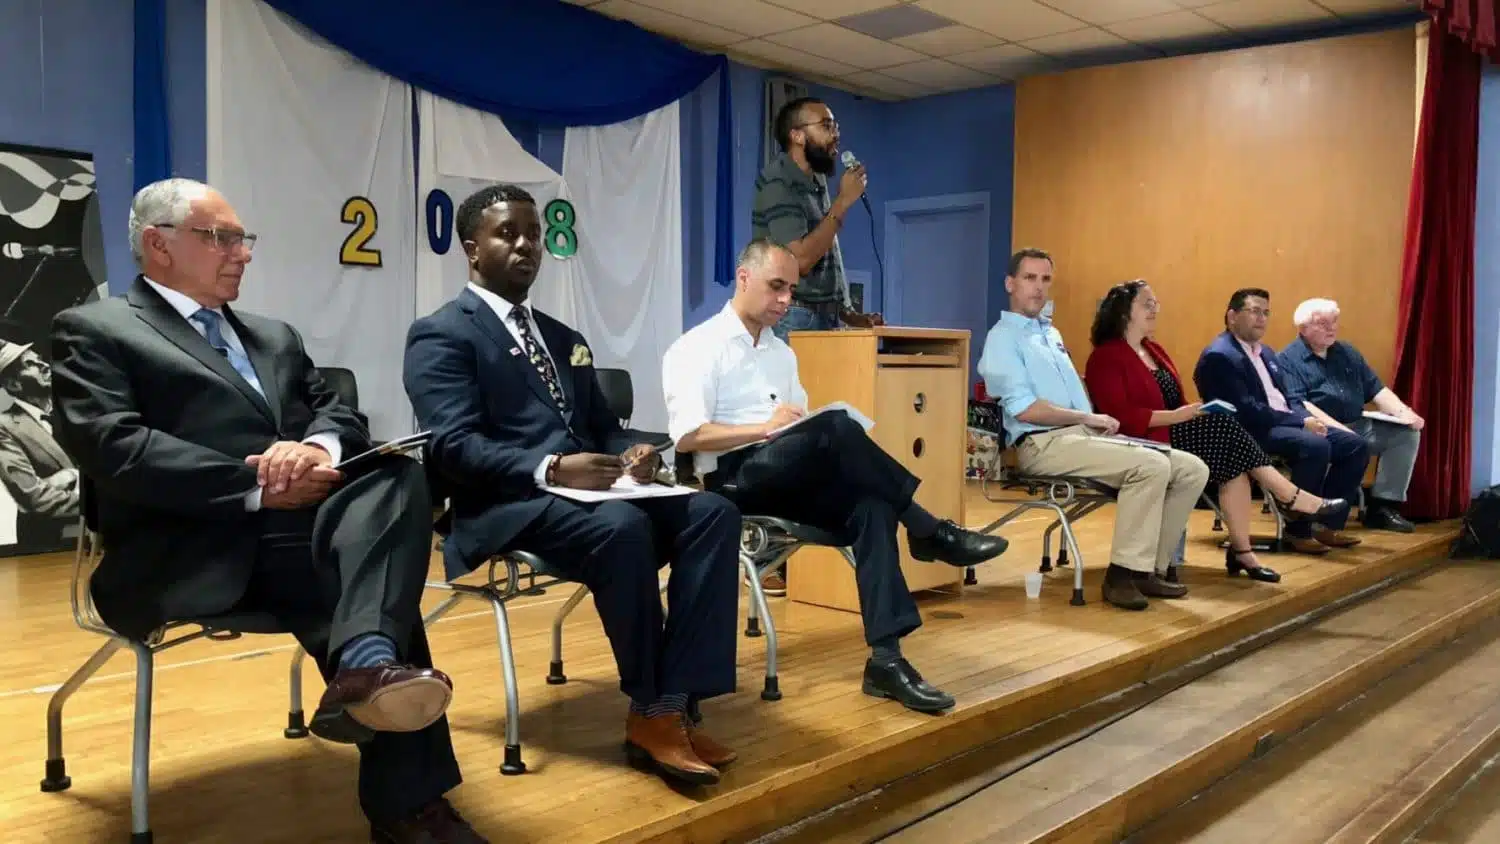 East Side ‘undebate’ hosts candidates from contested primaries for listening session